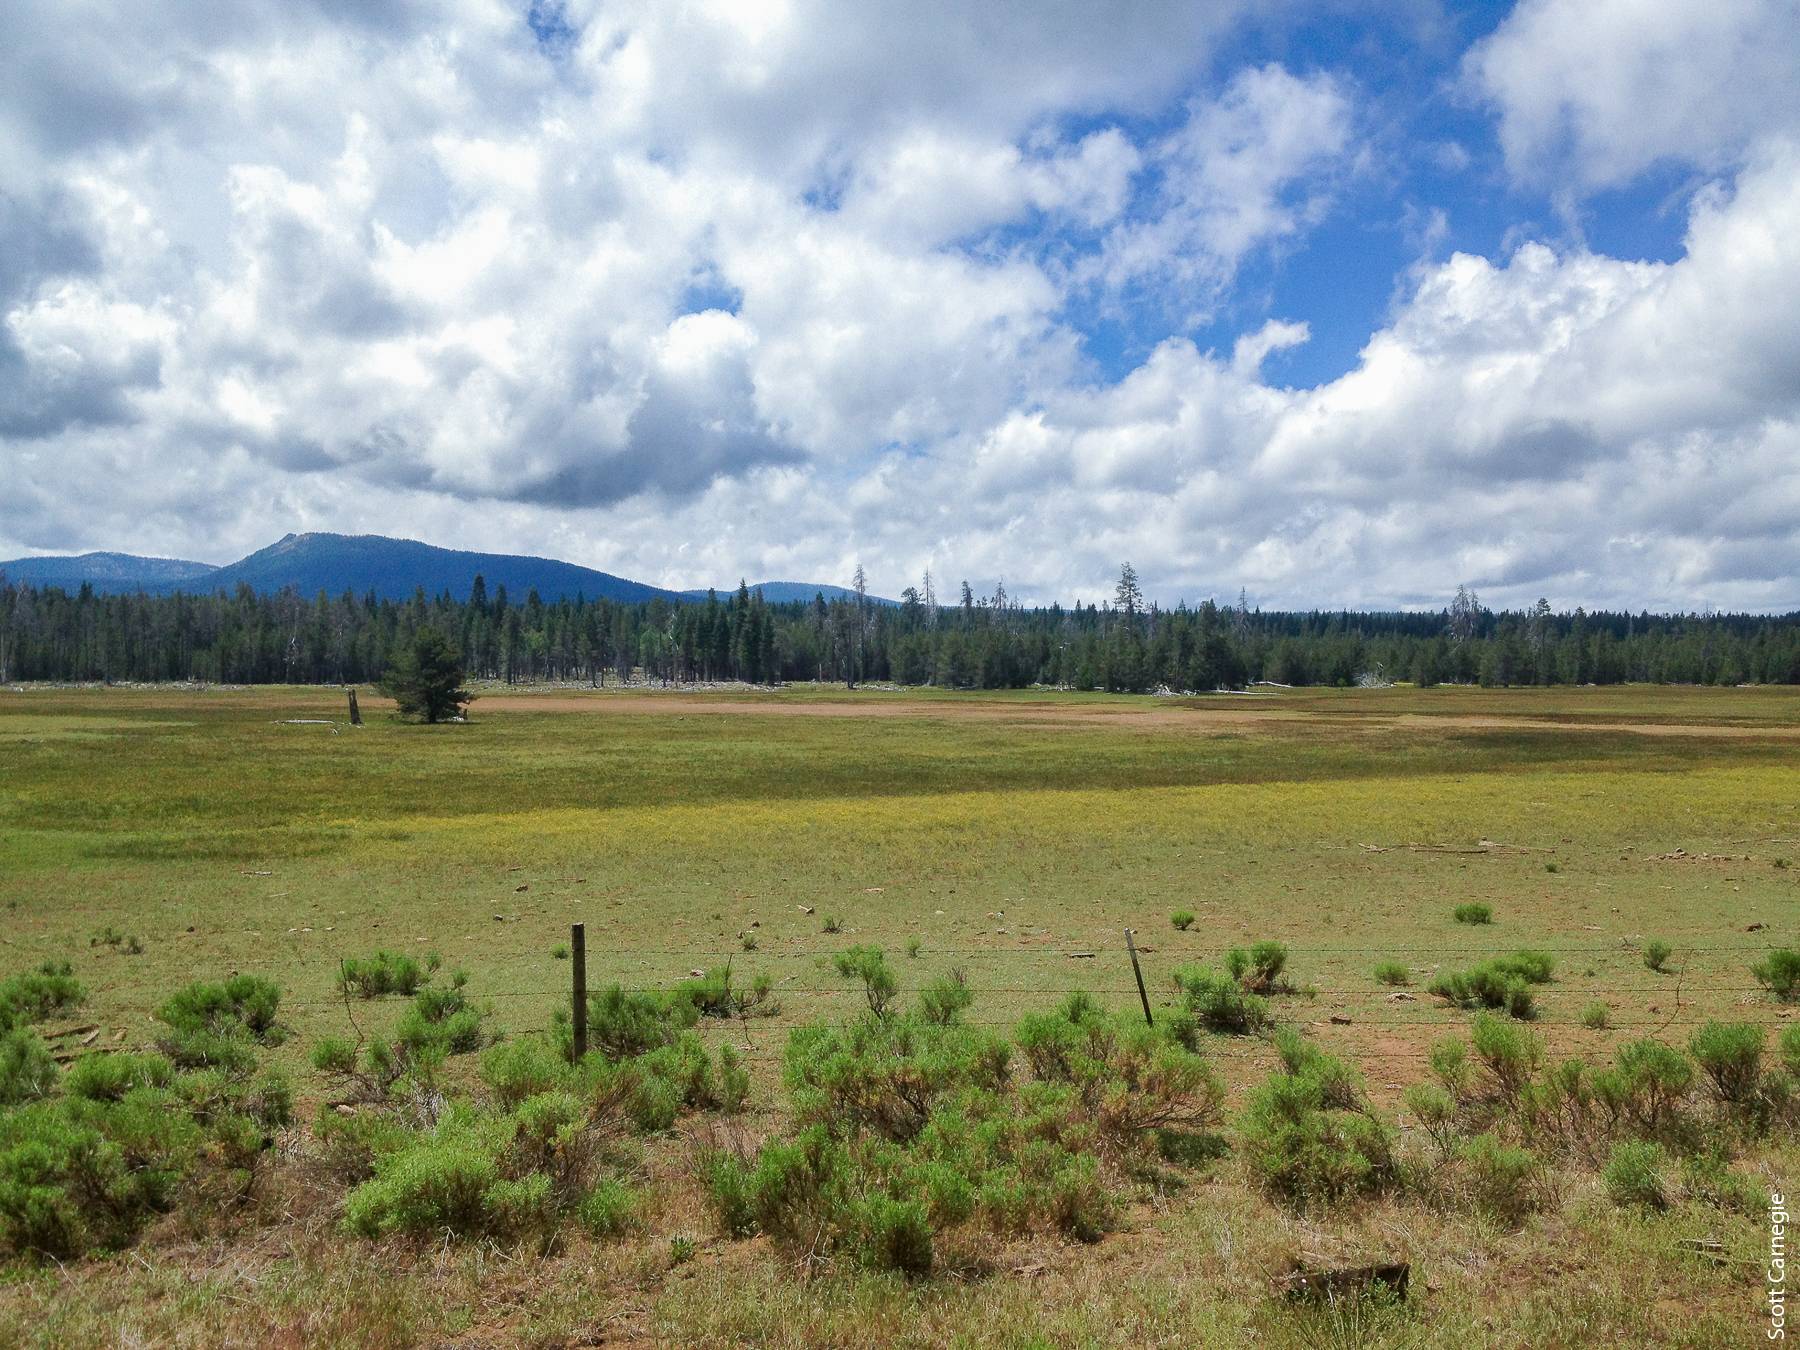 The Burney Gardens timber harvesting plan, which covers over 2,500 acres of land held by four different owners, is one of the largest watershed and meadow restoration projects proposed in California.